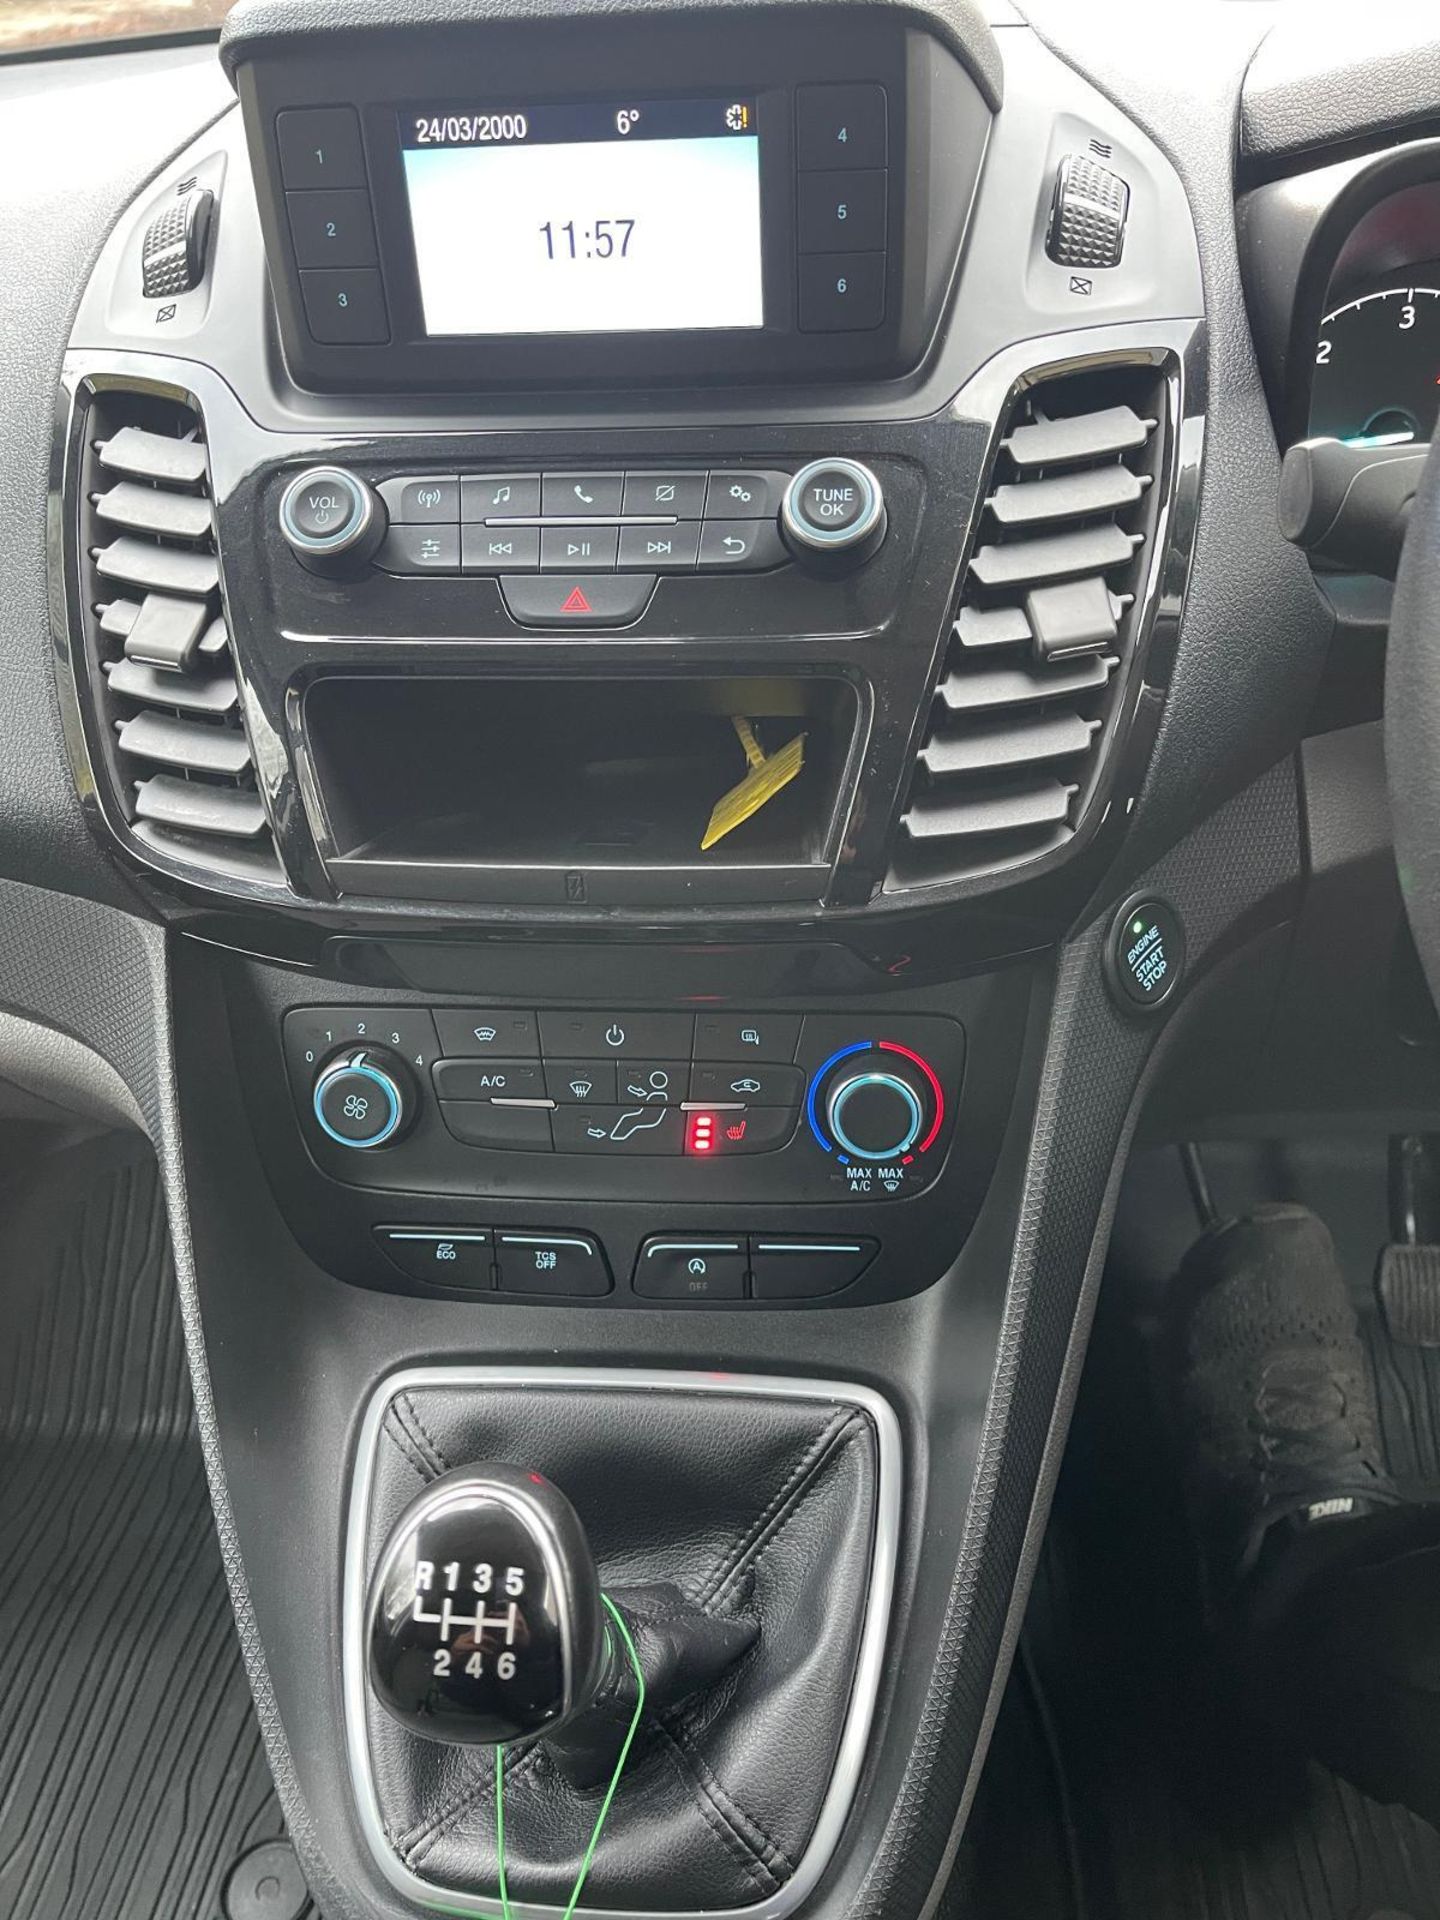 2019 FORD TRANSIT CONNECT LIMITED: POWERFUL 1.5 TDCI DIESEL - Image 12 of 12